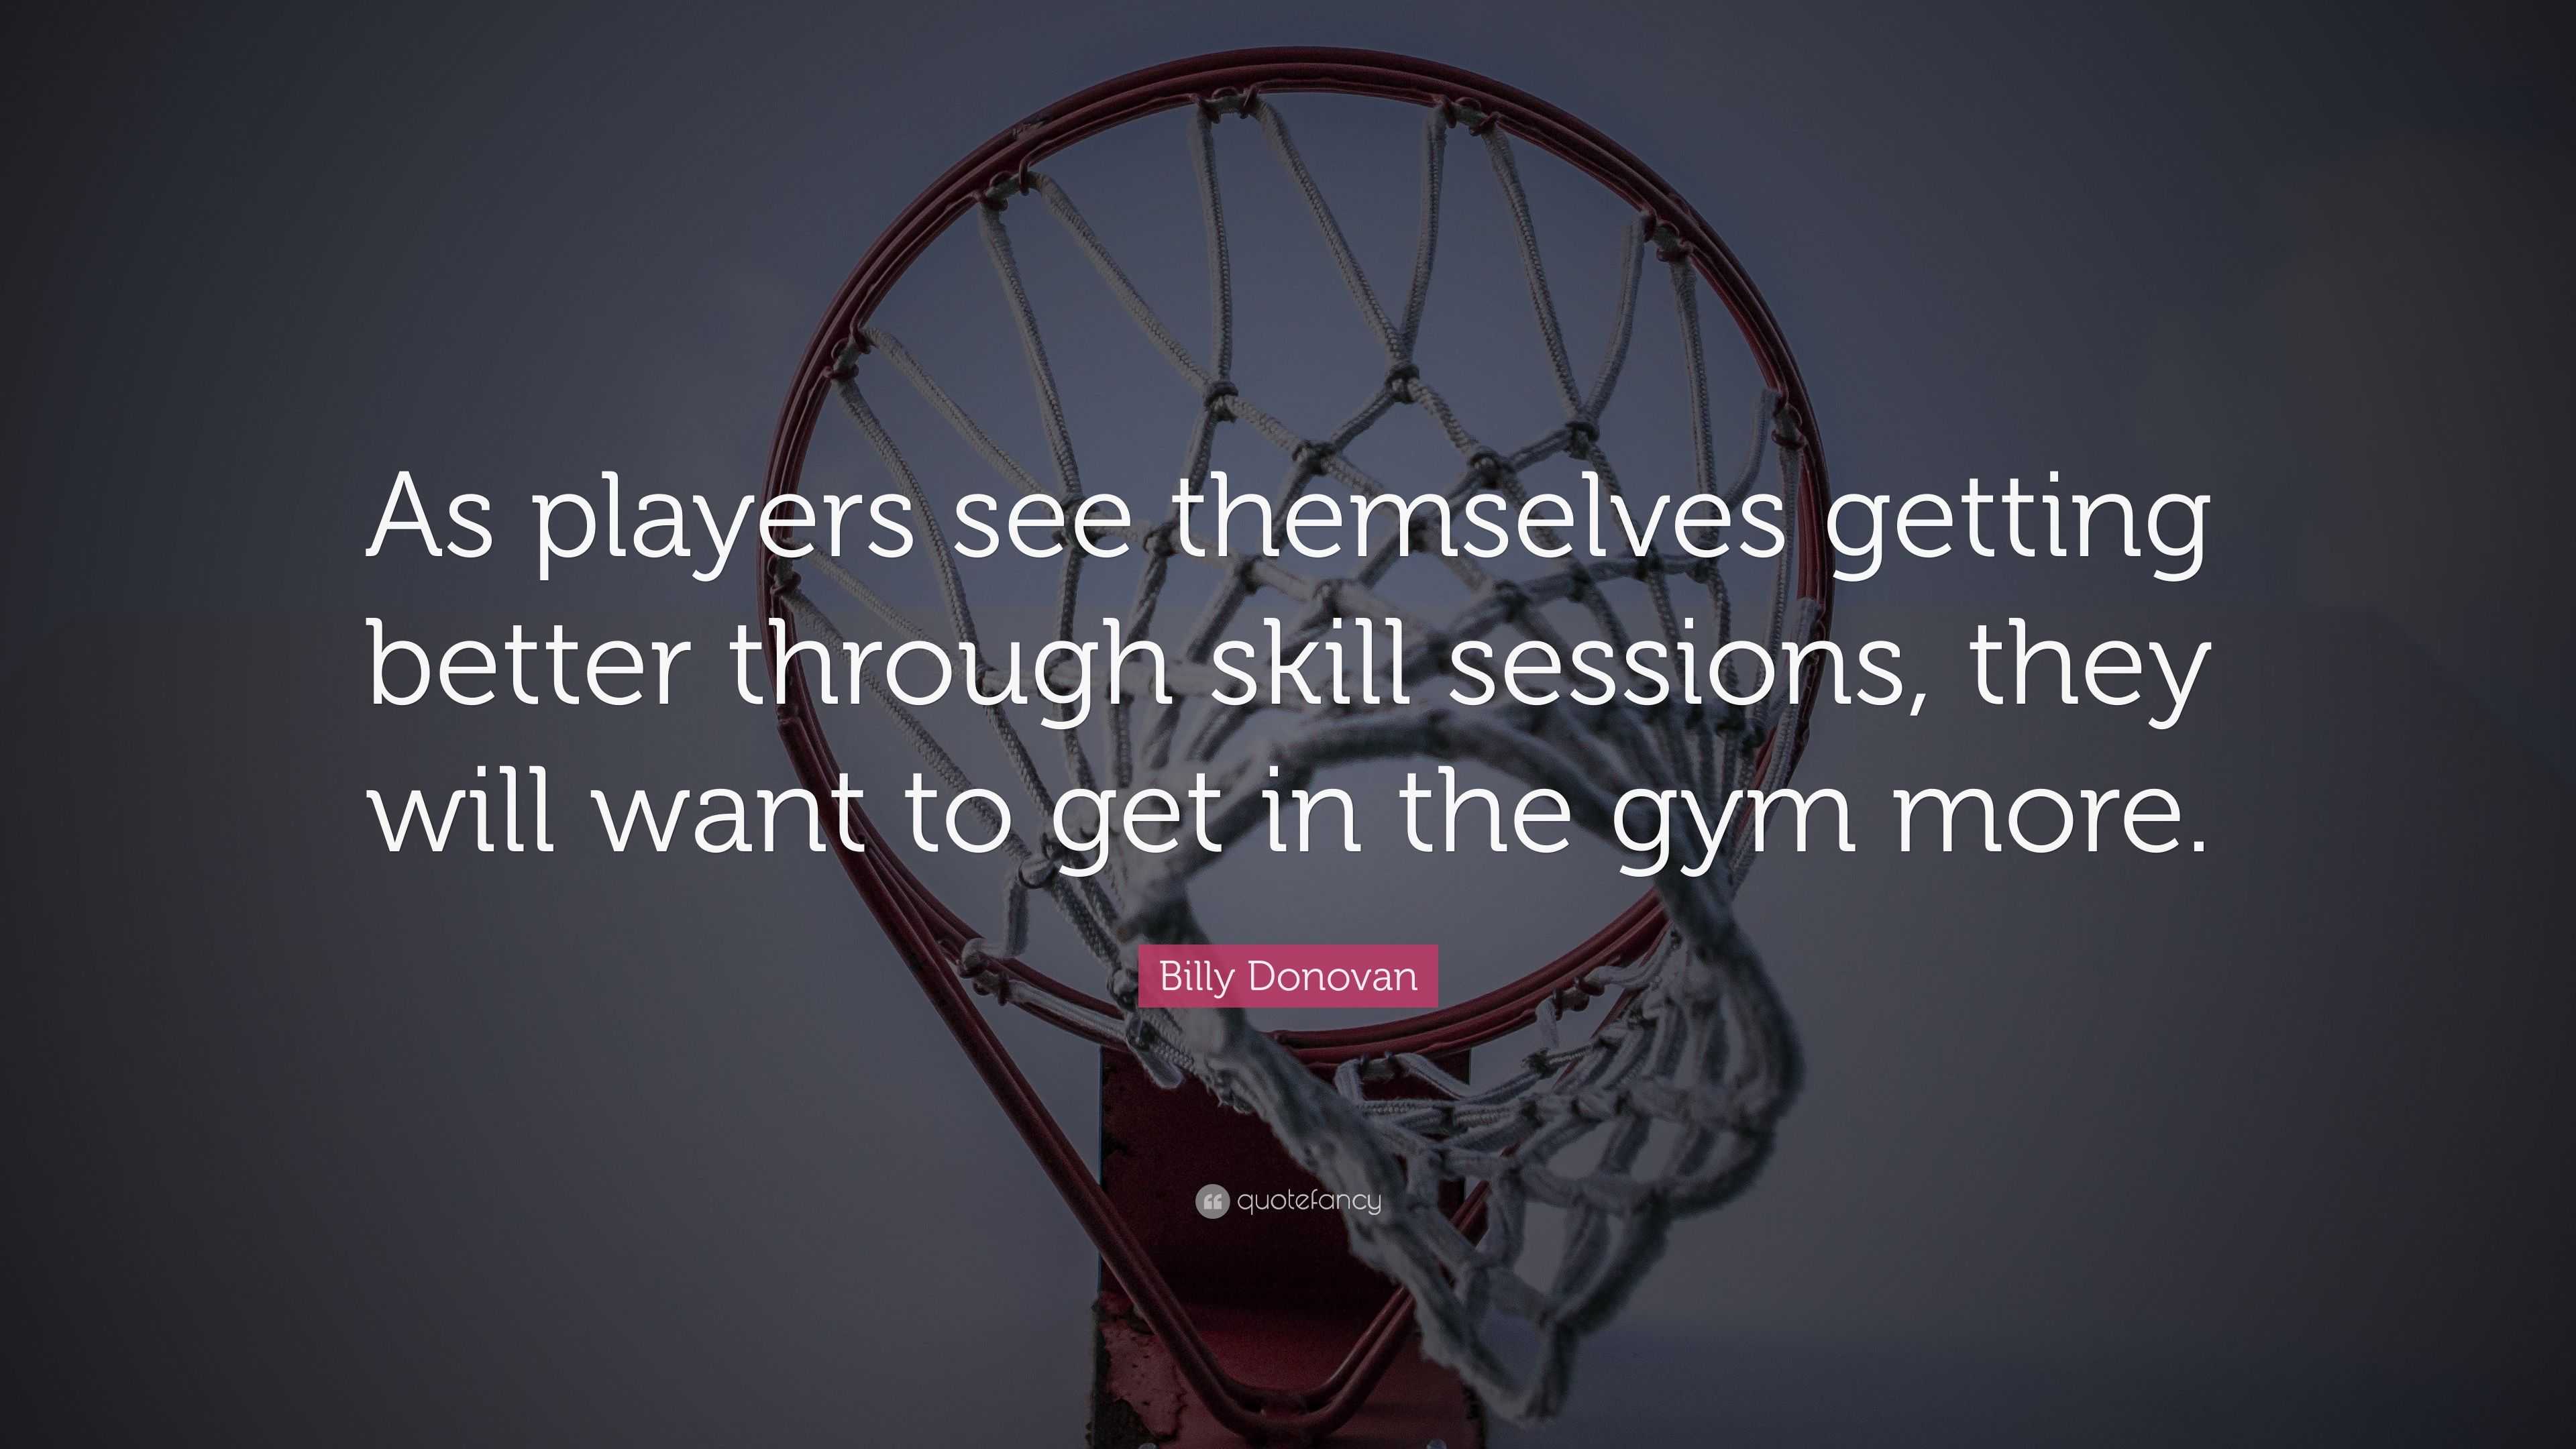 Billy Donovan Quote: “As players see themselves getting better through ...